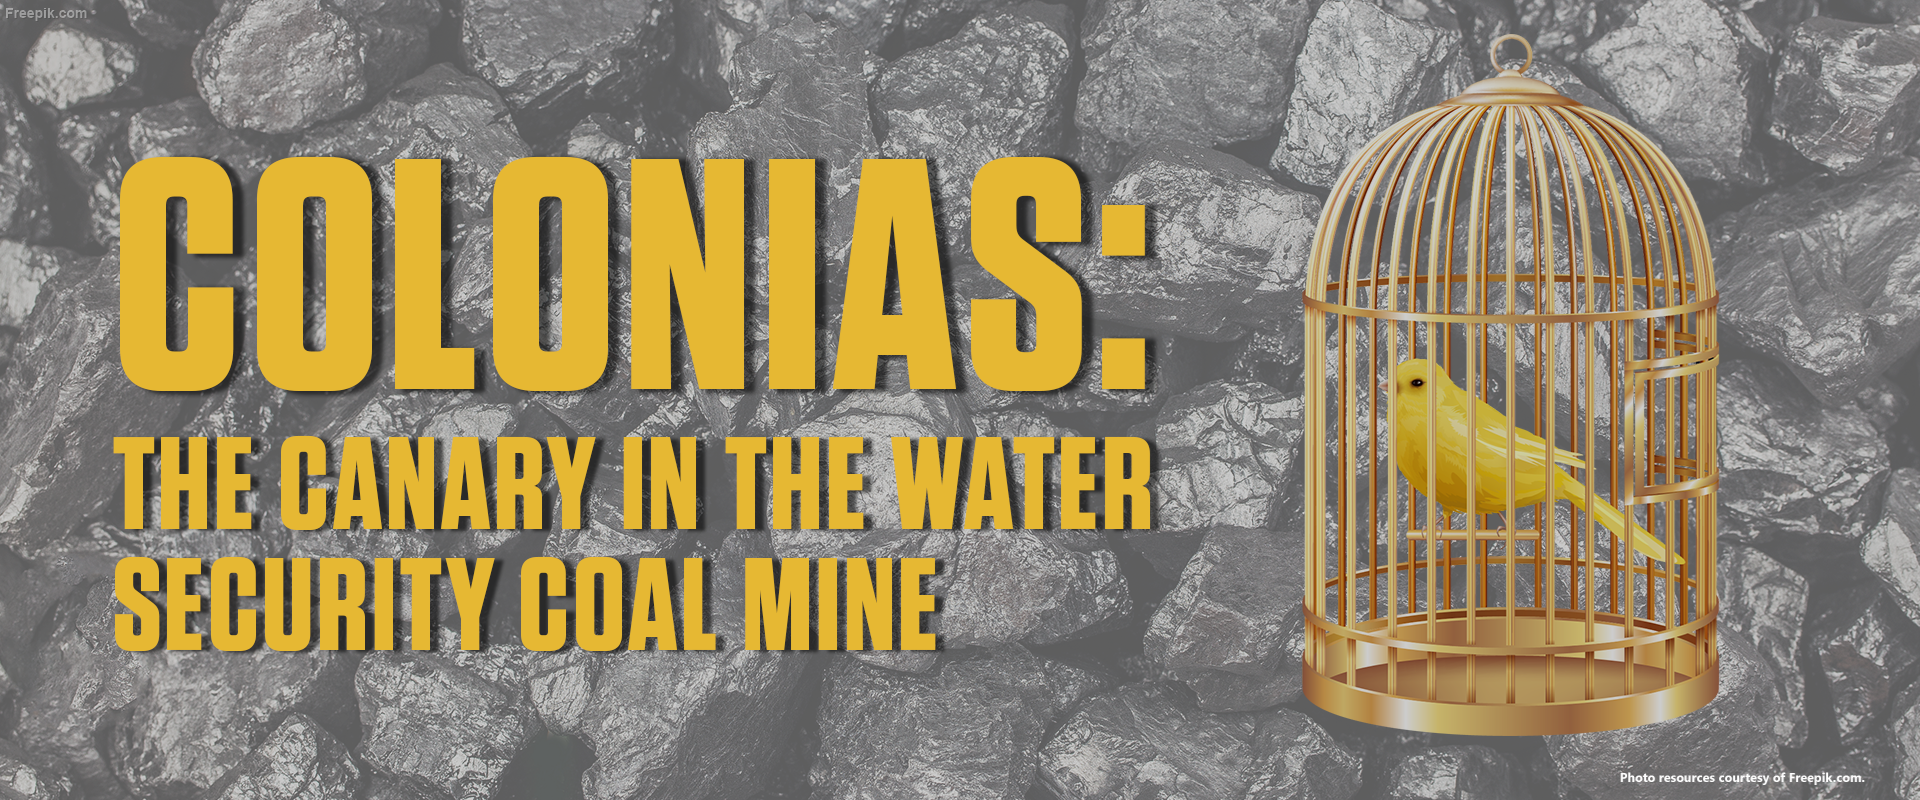 Colonias: The Canary in the Water Security Coal Mine